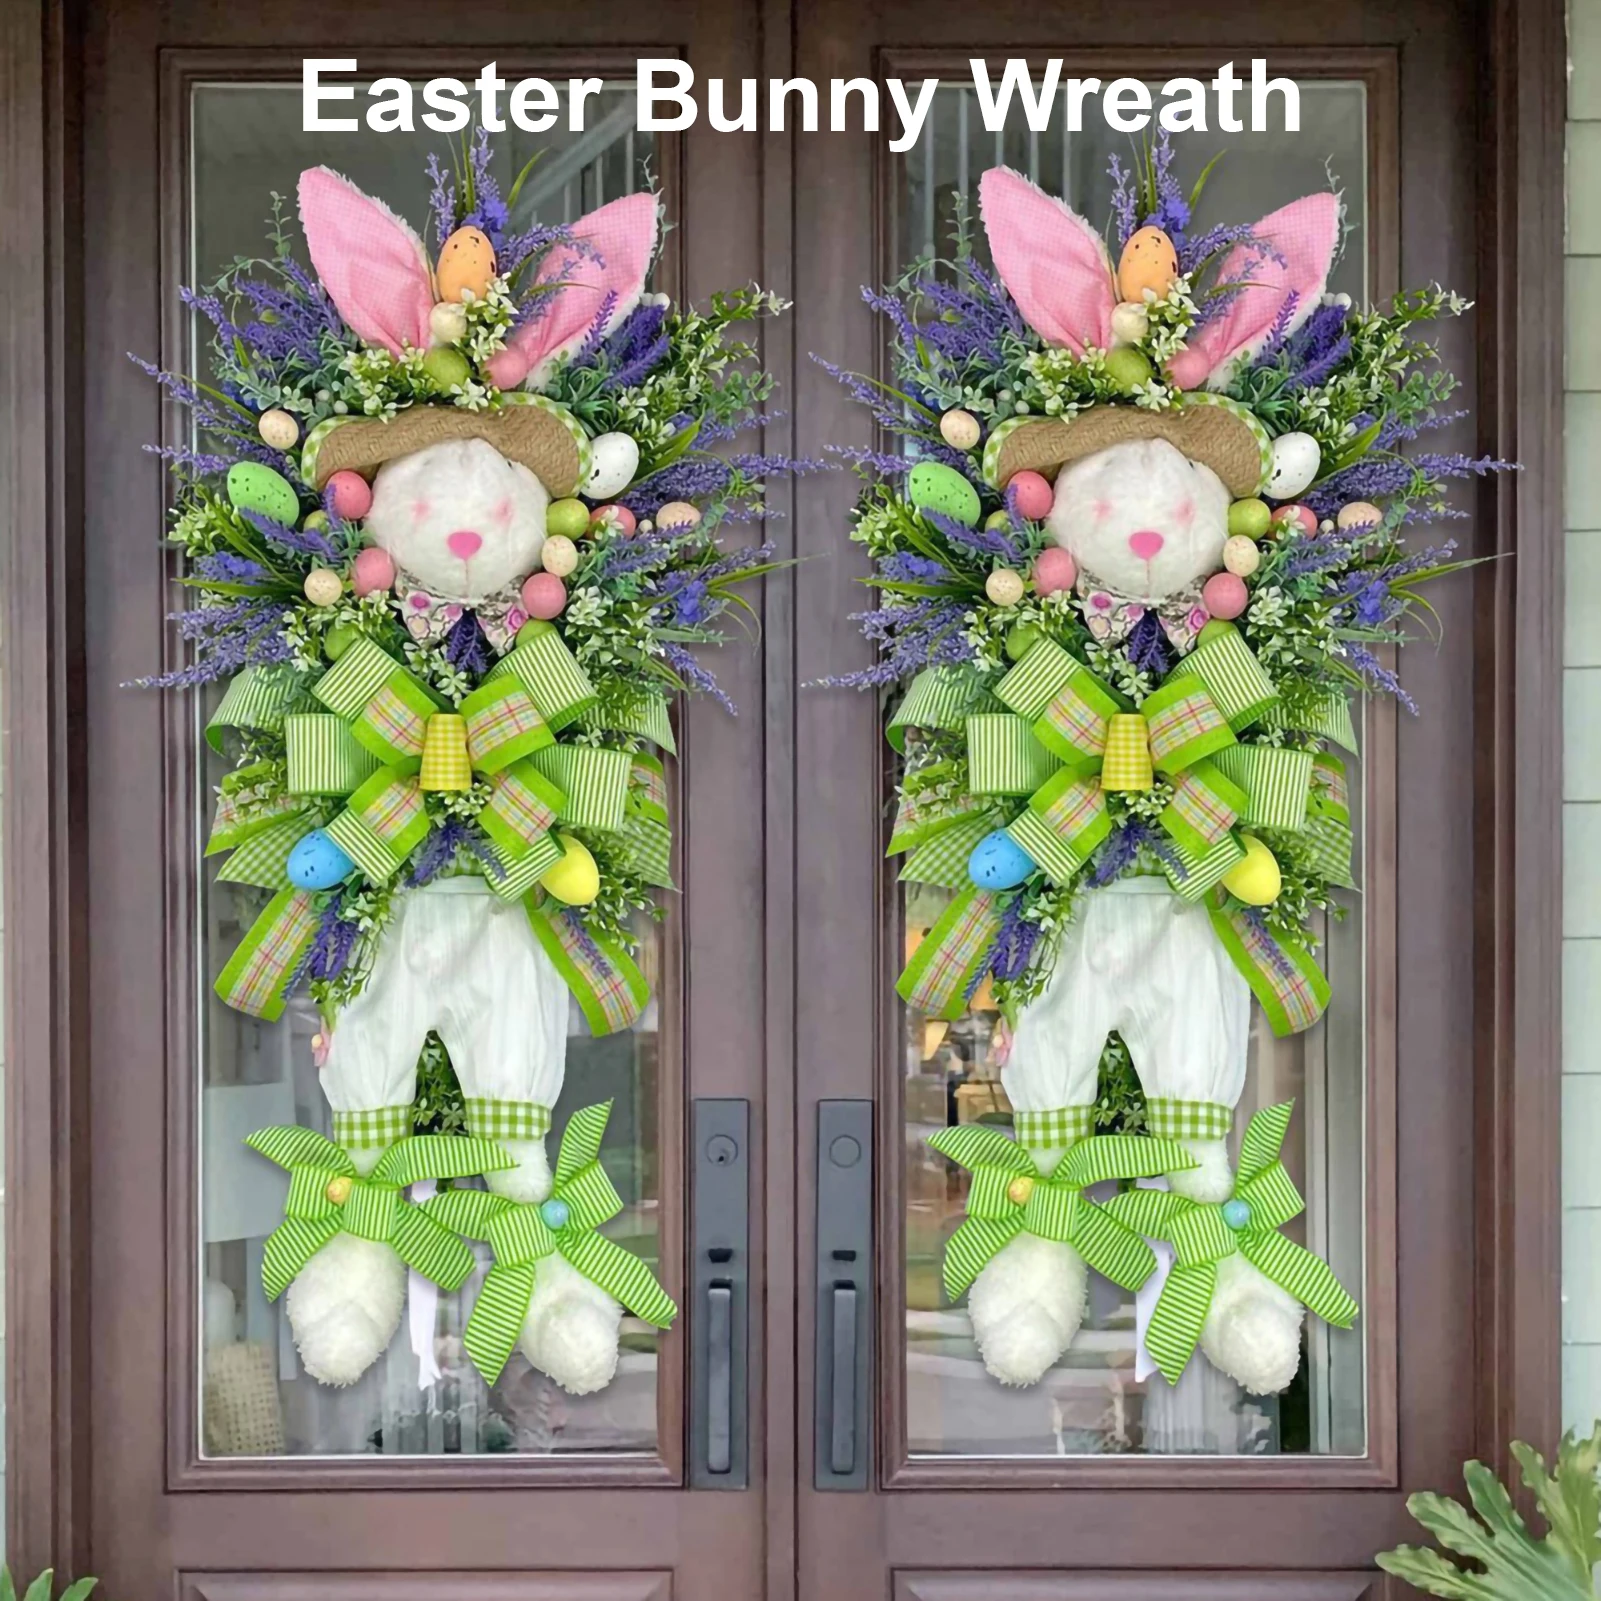 

Easter Bunny Wreath Handmade Simulated Plant Bunny Accessories Front Door Decoration Home Decorations